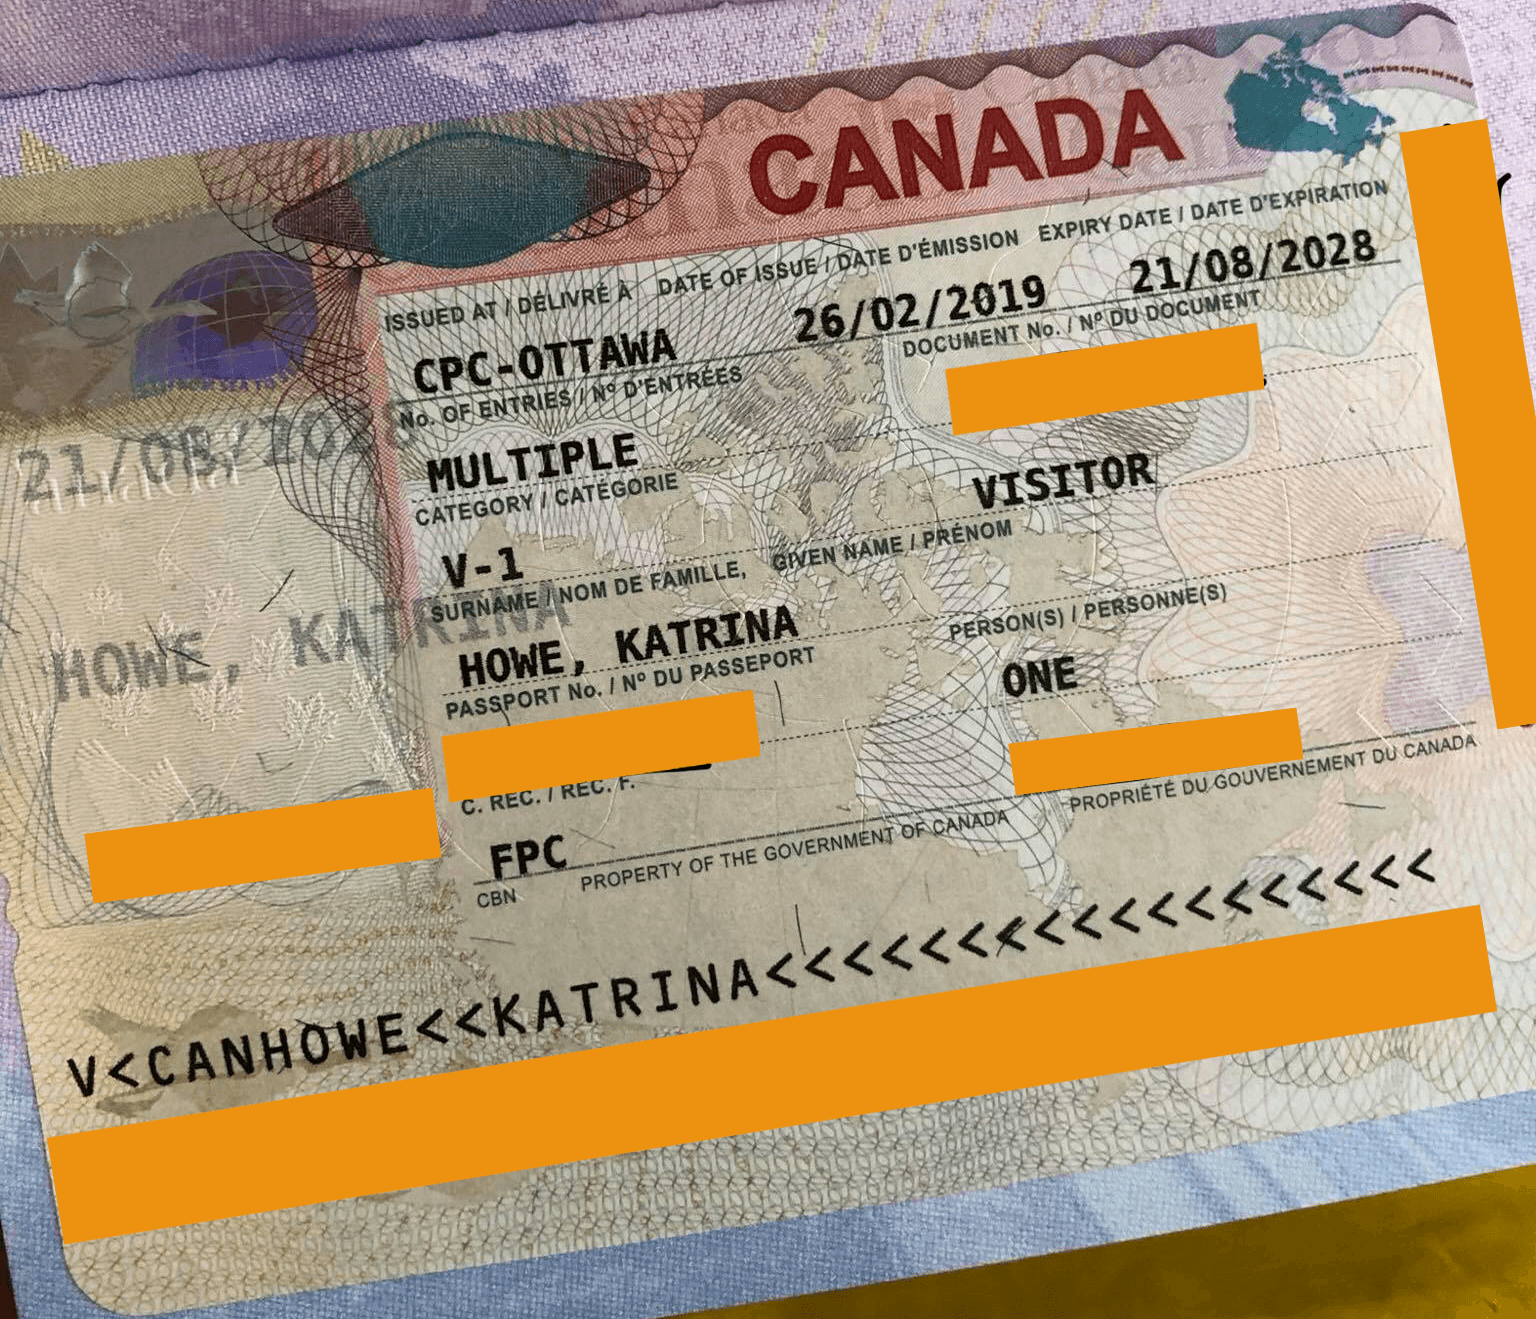 Can an Expiring Canadian F-1 Visa Be Used to Travel to Canada?